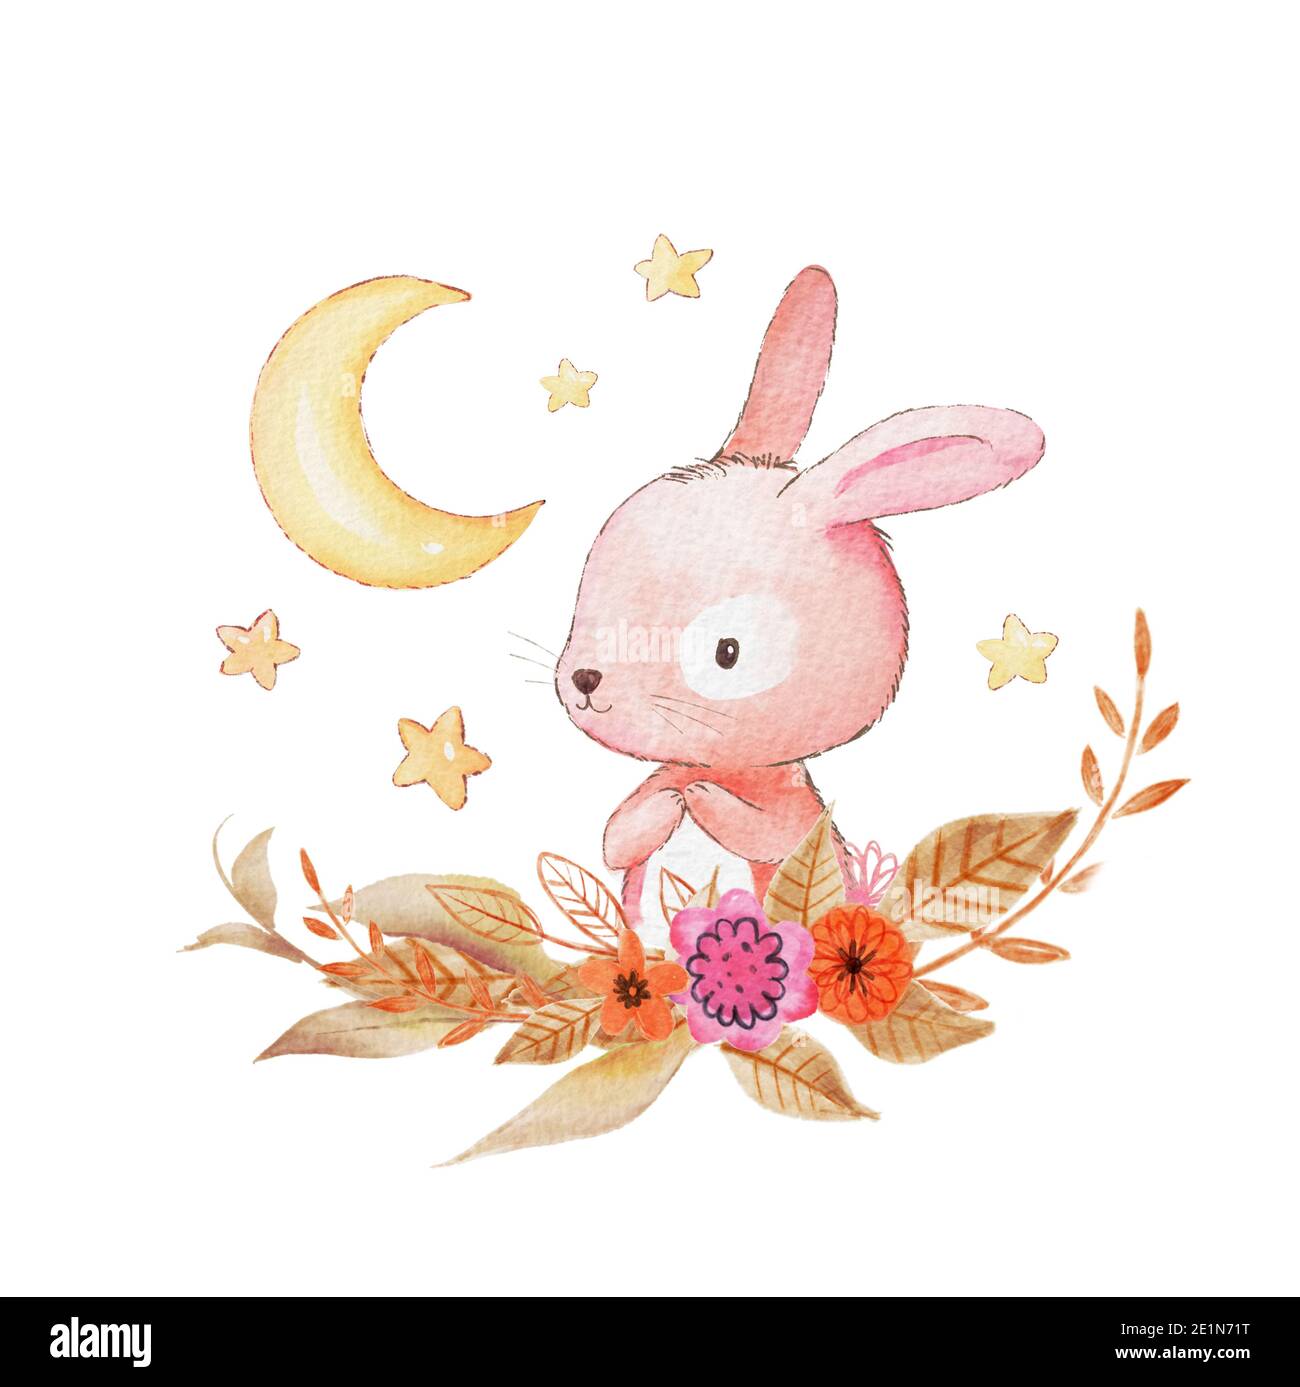 Card with two watercolor rabbits. Hand drawn watercolor bunny illustration. Moon, stars, flowers in the background Stock Photo